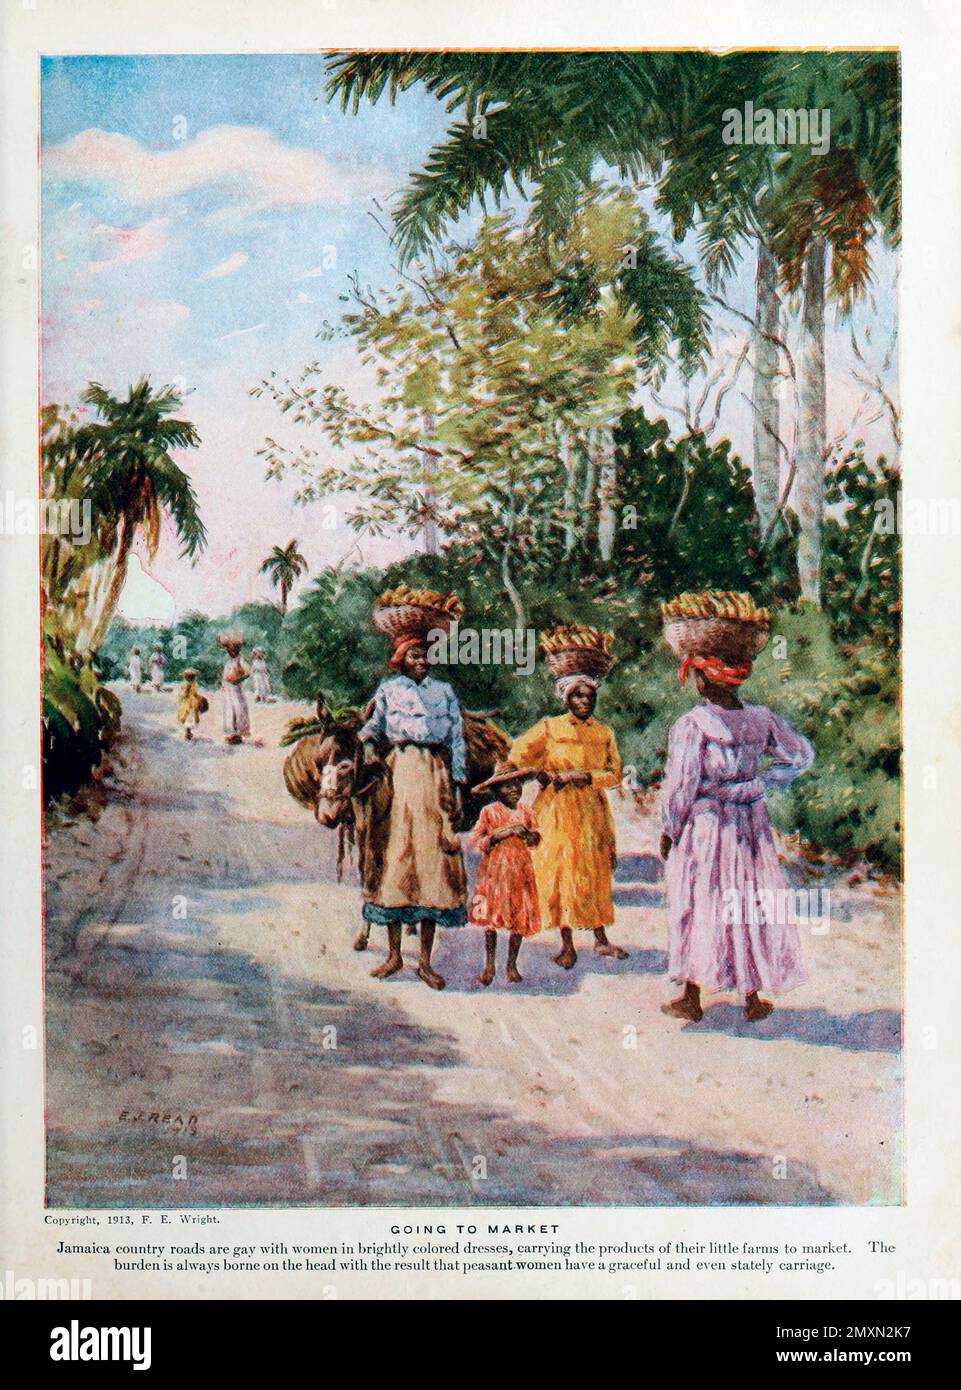 GOING TO MARKET, Jamaica Jamaica country roads are gay with women in brightly colored dresses, carrying the products of their little farms to market, The burden is always borne on the head with the result that peasant women have a graceful and even stately carriage. from the book Panama and the Canal in picture and prose : a complete story of Panama, as well as the history, purpose and promise of its world-famous canal the most gigantic engineering undertaking since the dawn of time by Willis John Abbot,1863-1934 Published in London ; New York by Syndicate Publishing Co. in 1913 Stock Photo